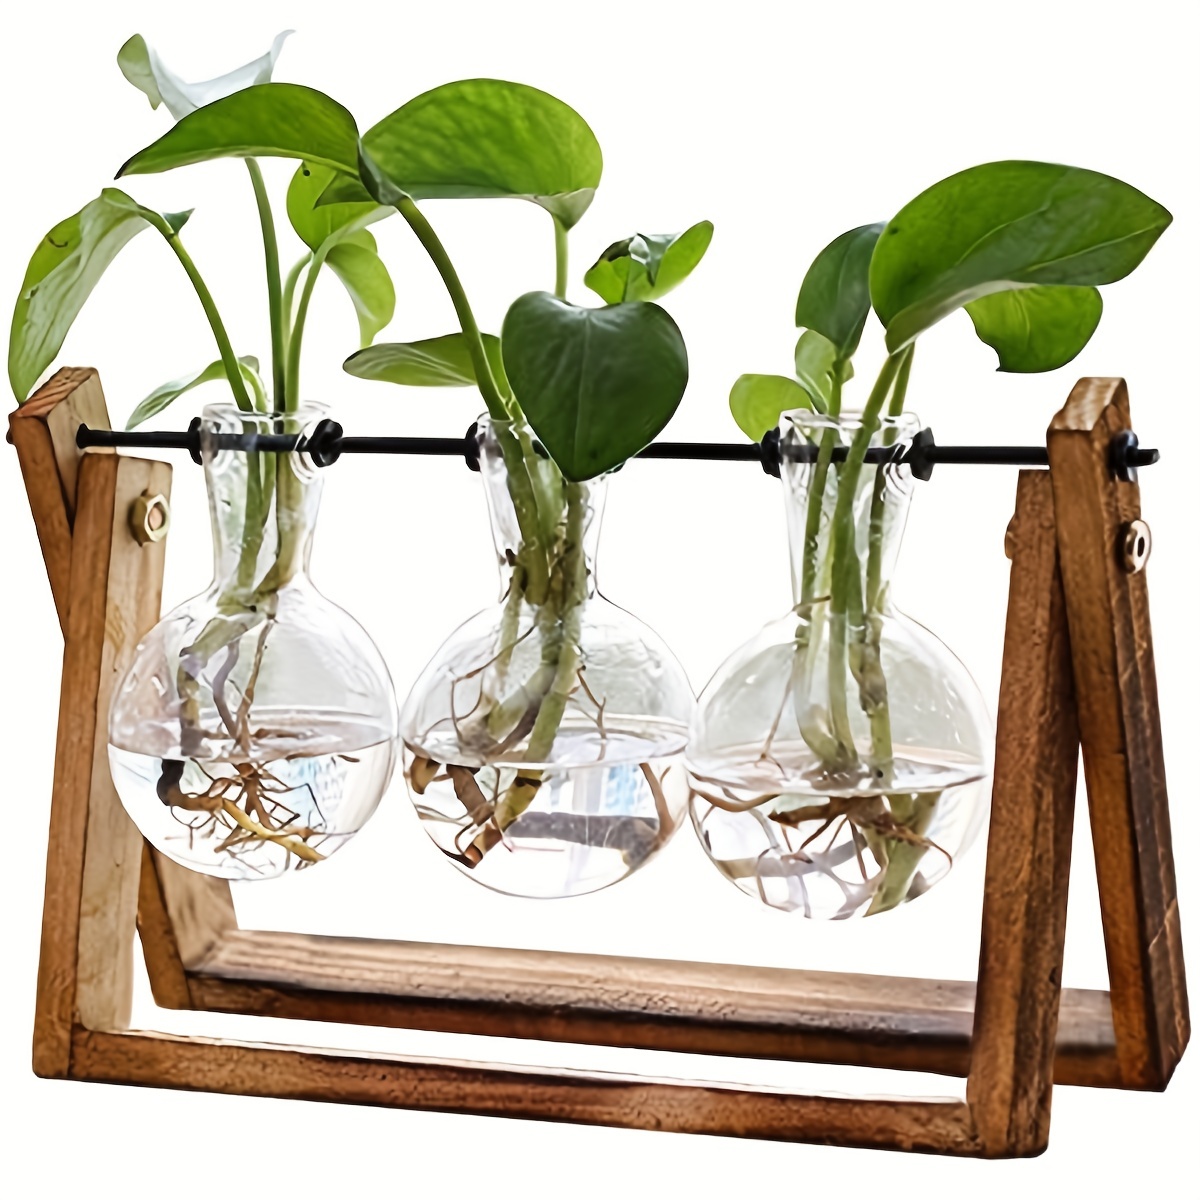 

1pc Plant Terrarium With Wooden Stand, Air Planter Bulb Glass Vase Metal Swivel Holder Retro Tabletop For Hydroponics Home Garden Office Decoration - 3 Bulb Vase